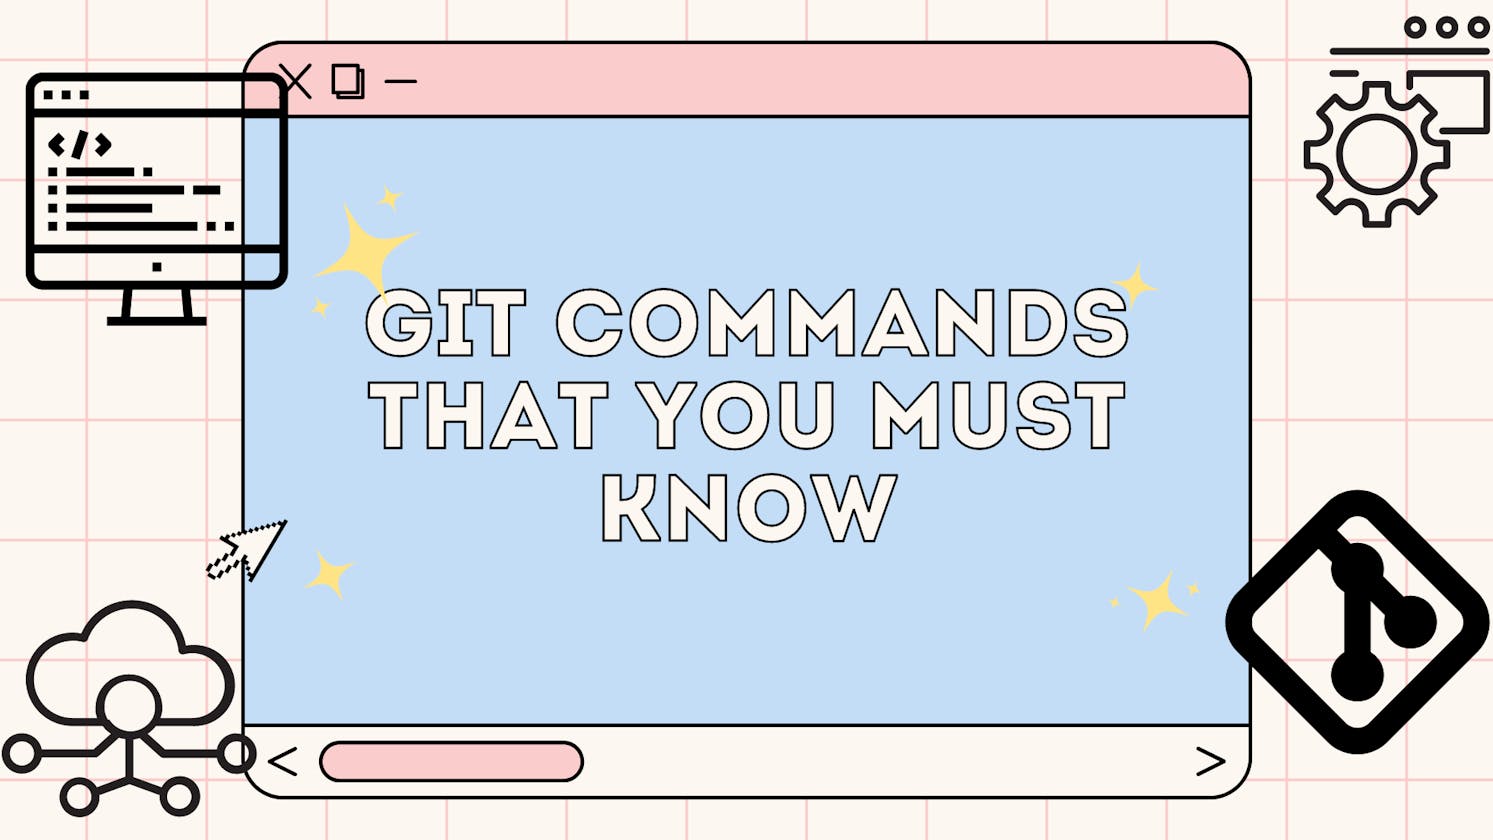 Git Commands that you must know